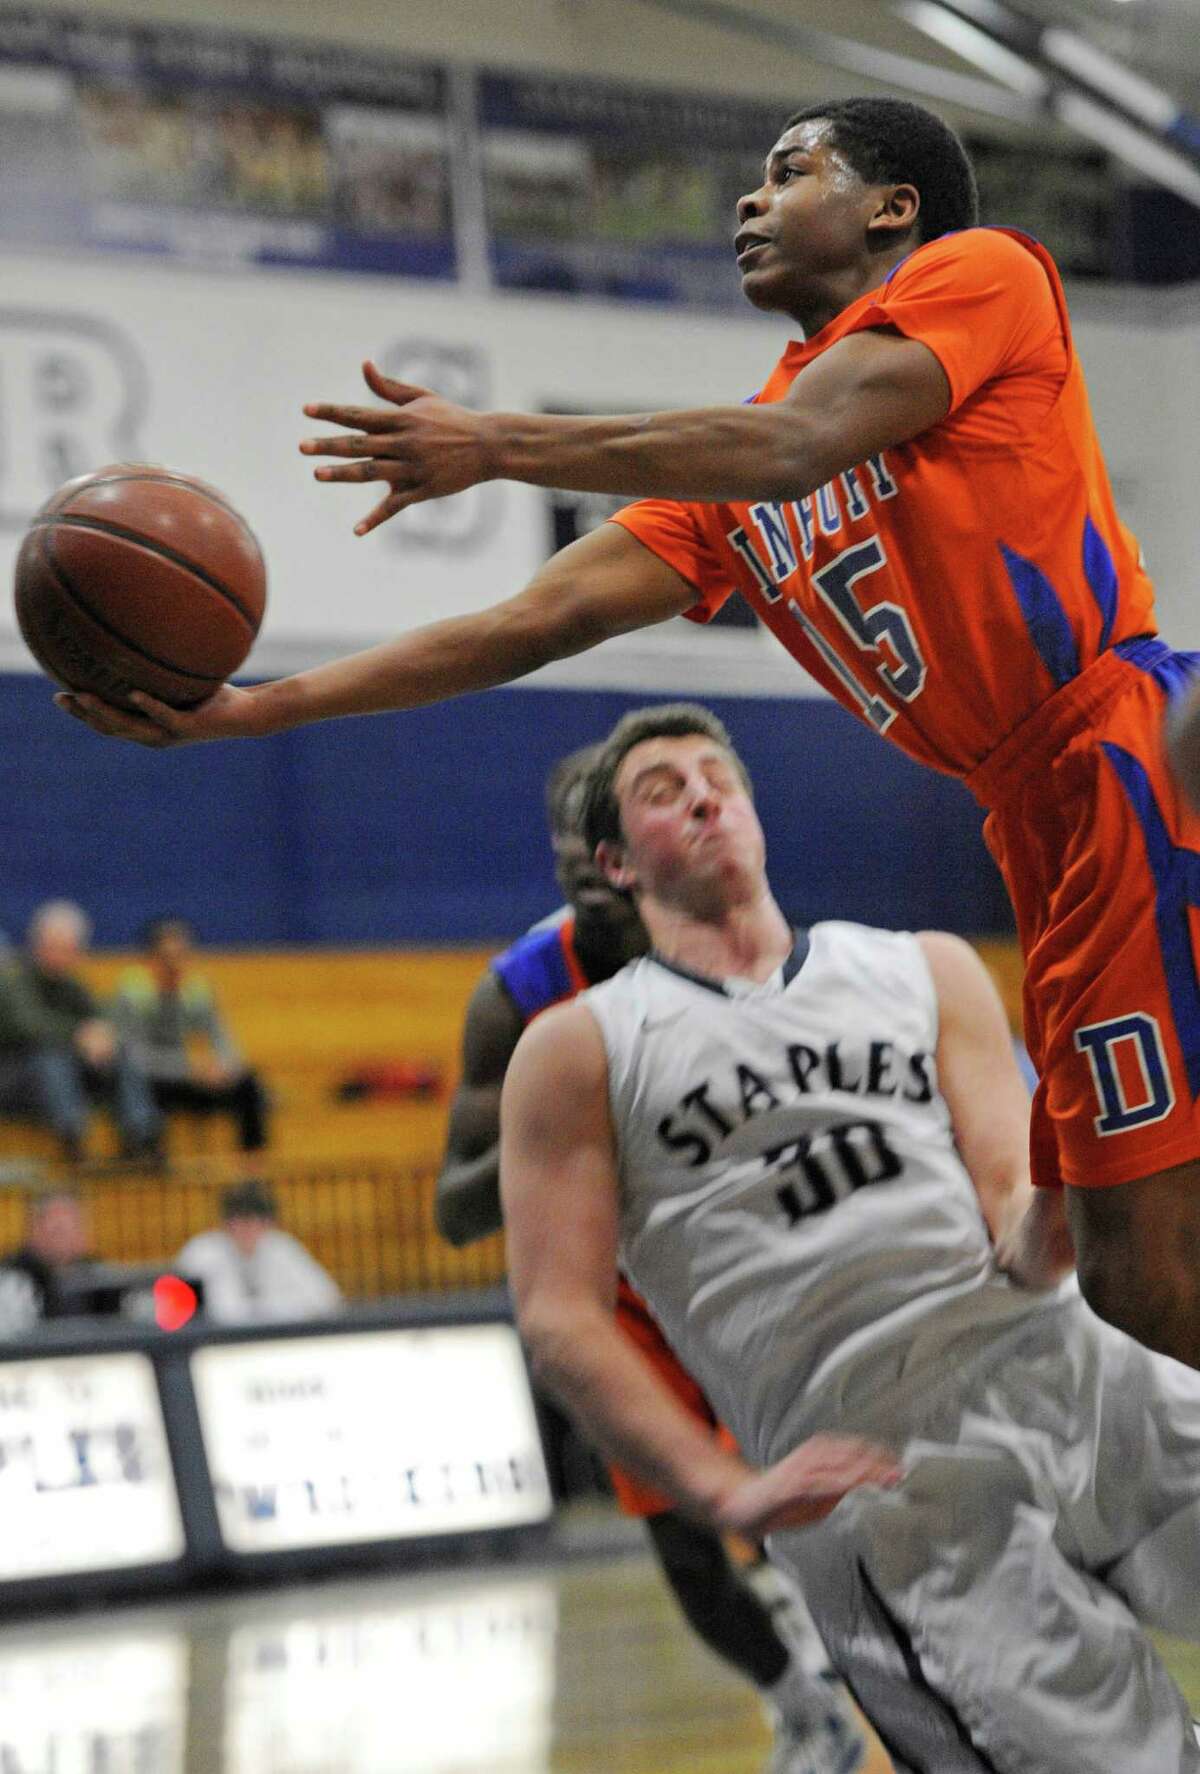 Danbury high school's Tysheen McCrea driving to the basket during a boys basketball game against Staples high school played at Staples, Westport, CT on Wednesday, December,18th, 2013.